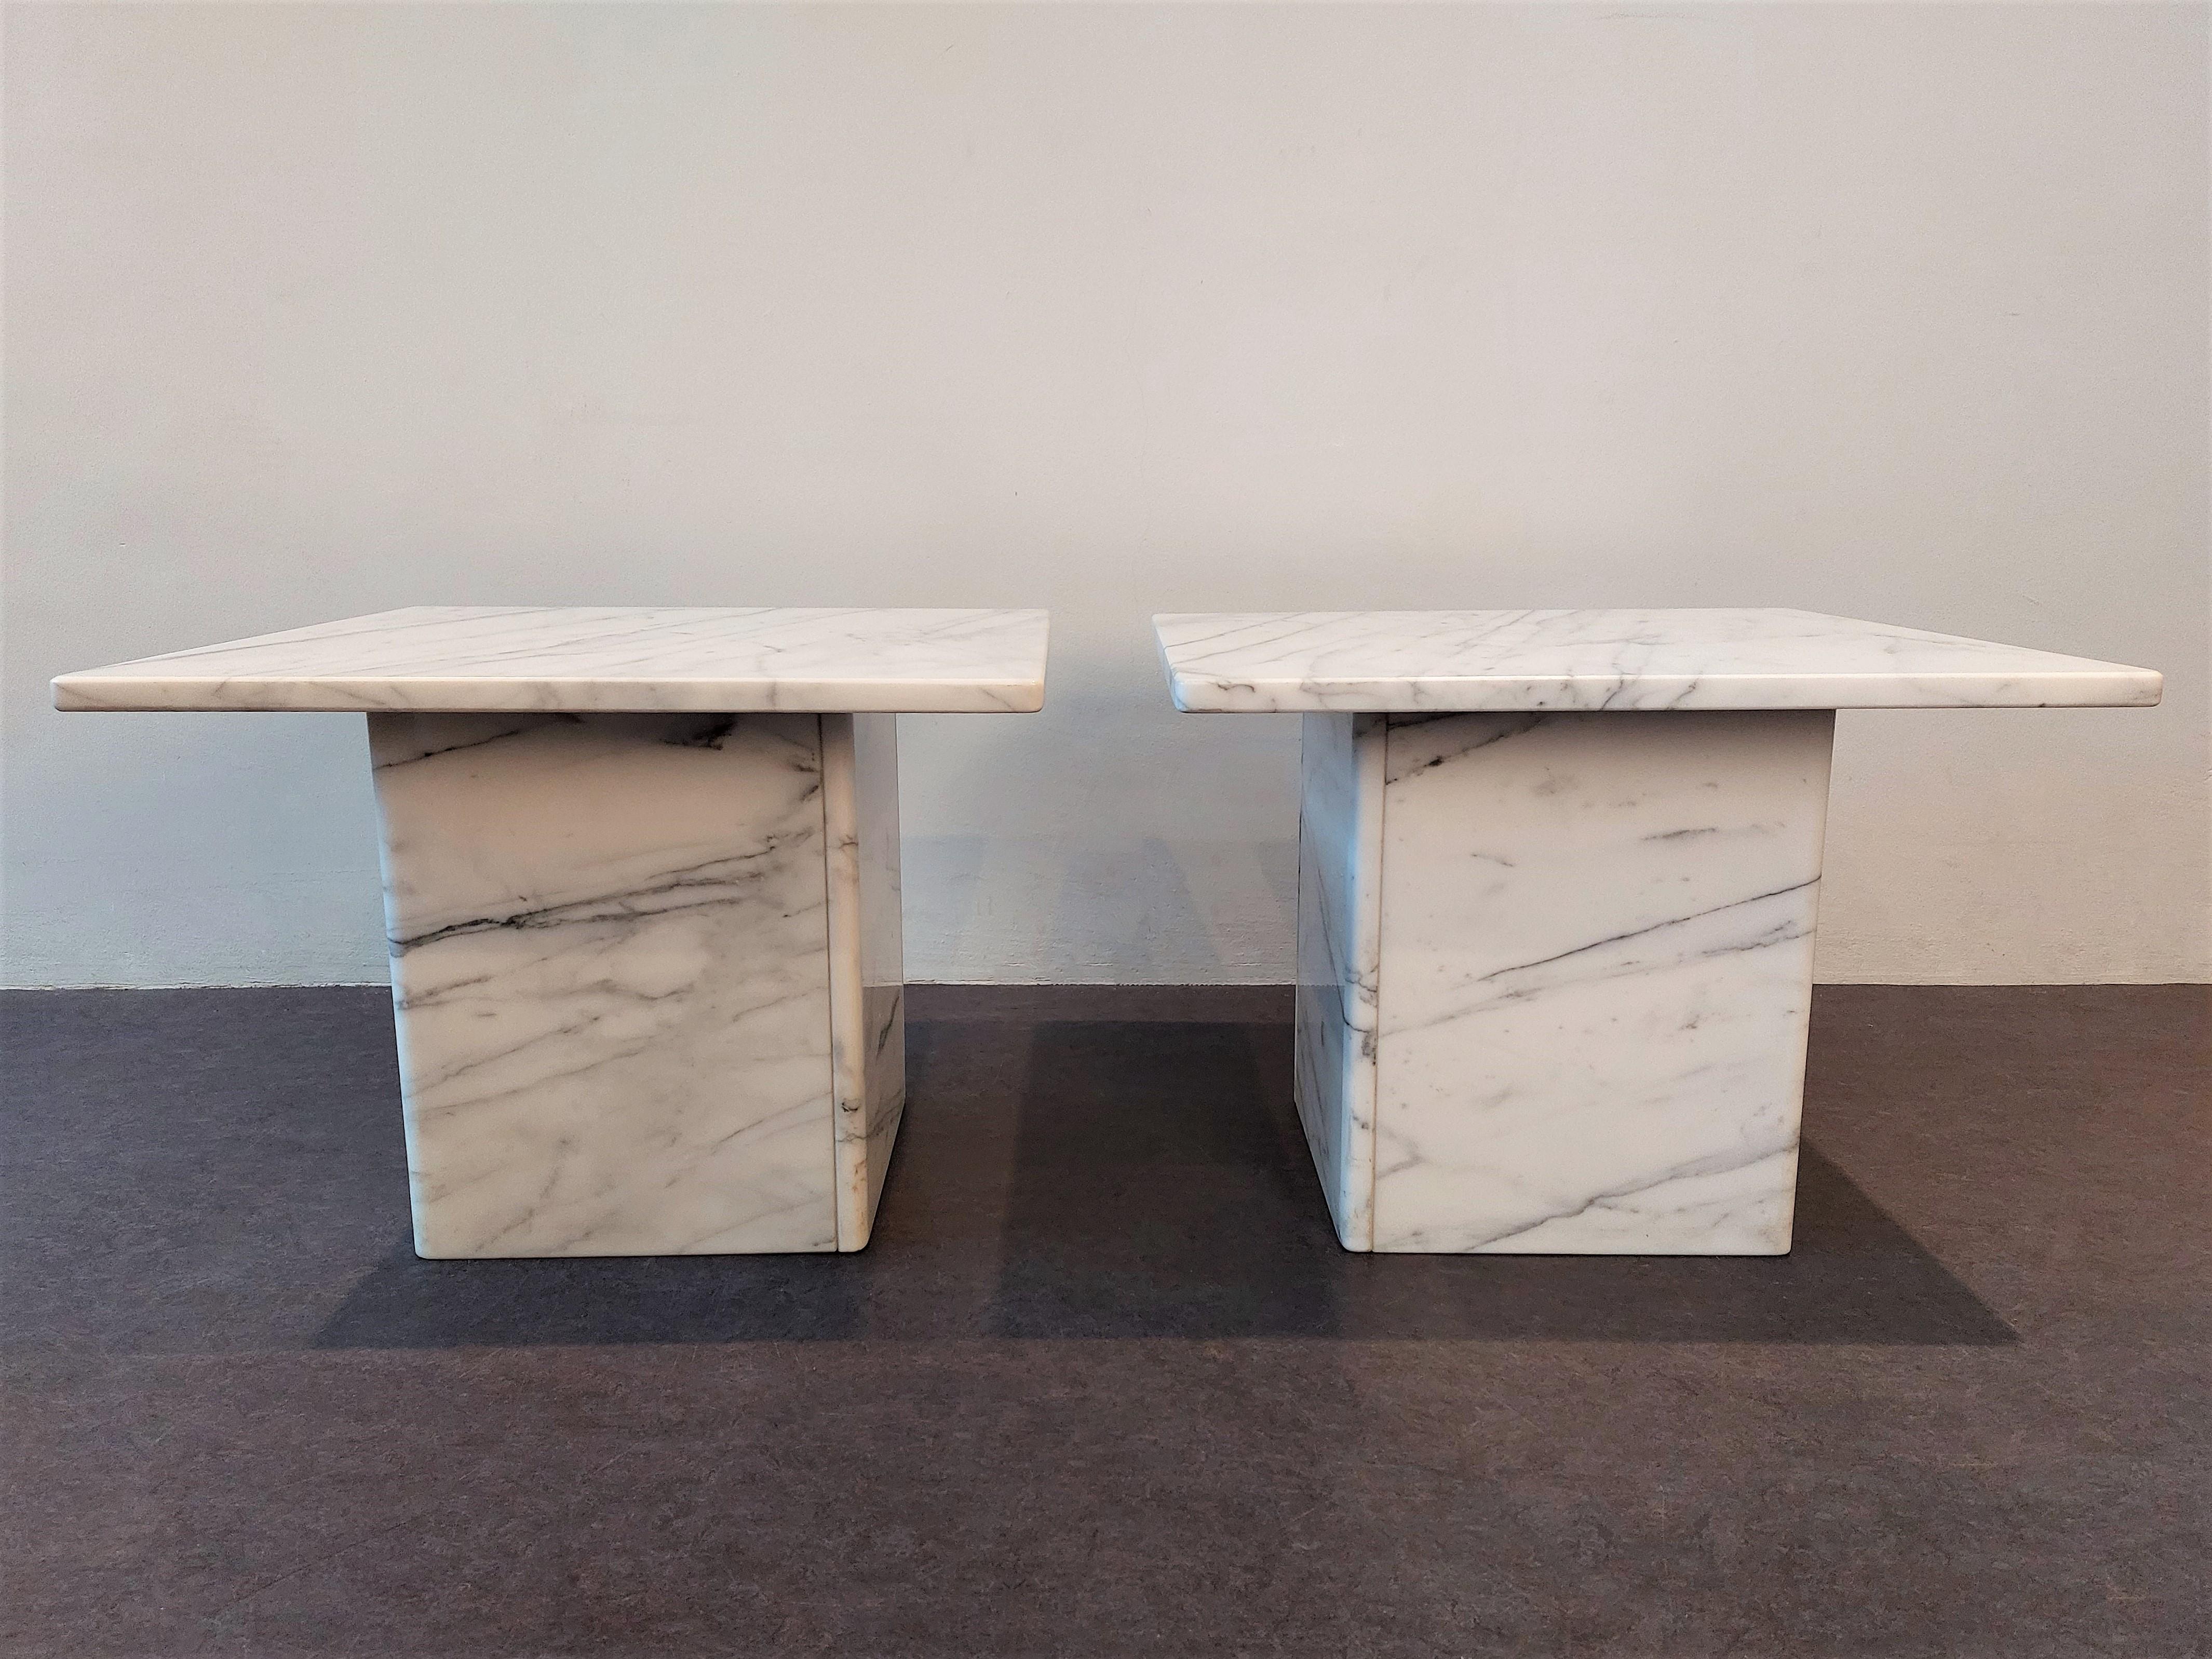 We have two of these side tables available. A square white marble top on a white marble base. All is in a good to very good condition with minor signs of age and use. The base consists out of 4 slats of marble glued together in a square with rounded